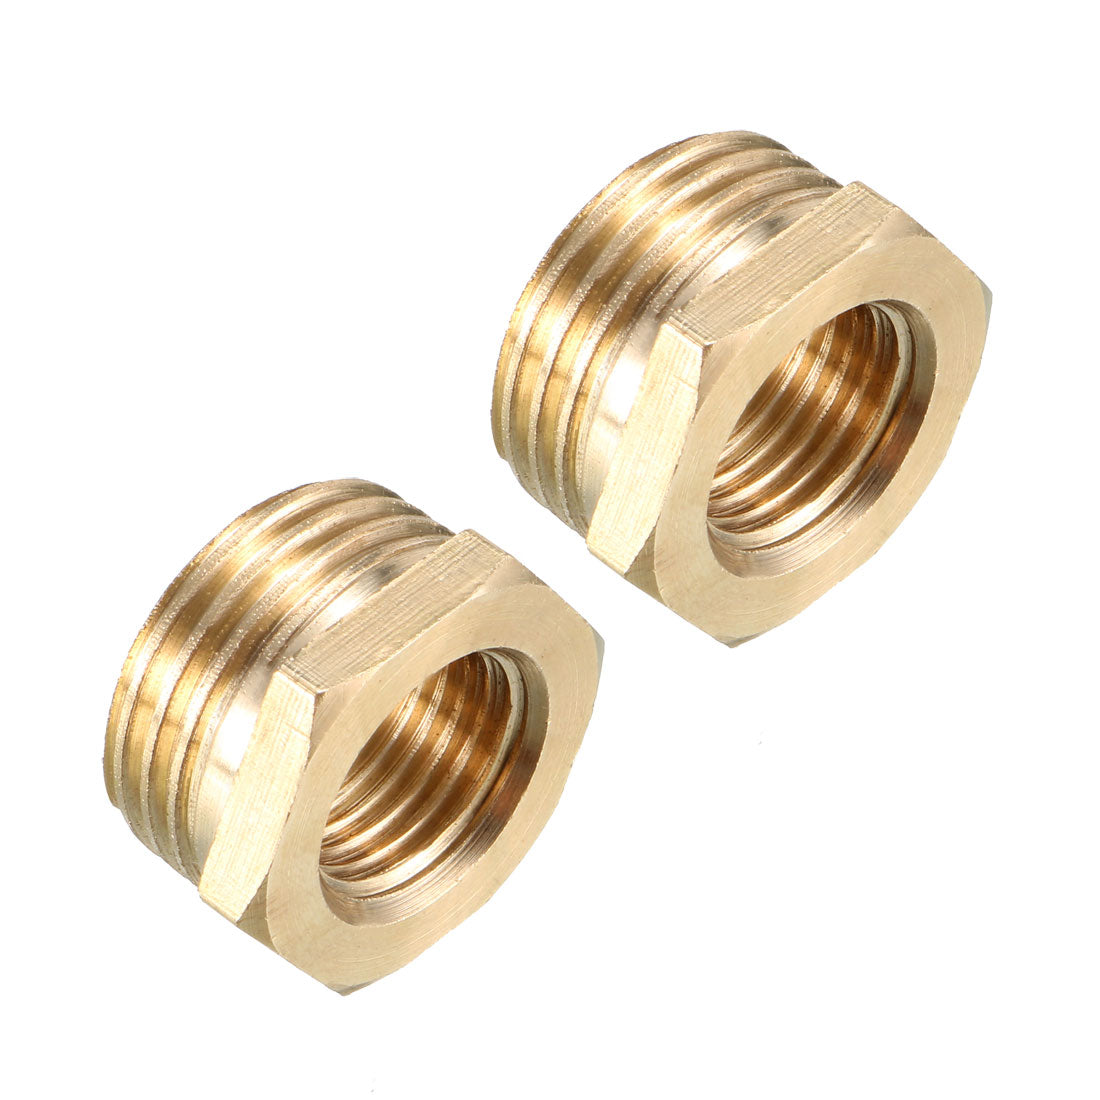 uxcell Uxcell Brass Threaded Pipe Fitting 1/2 PT Male x 1/4 PT Female Hex Bushing Adapter 2pcs